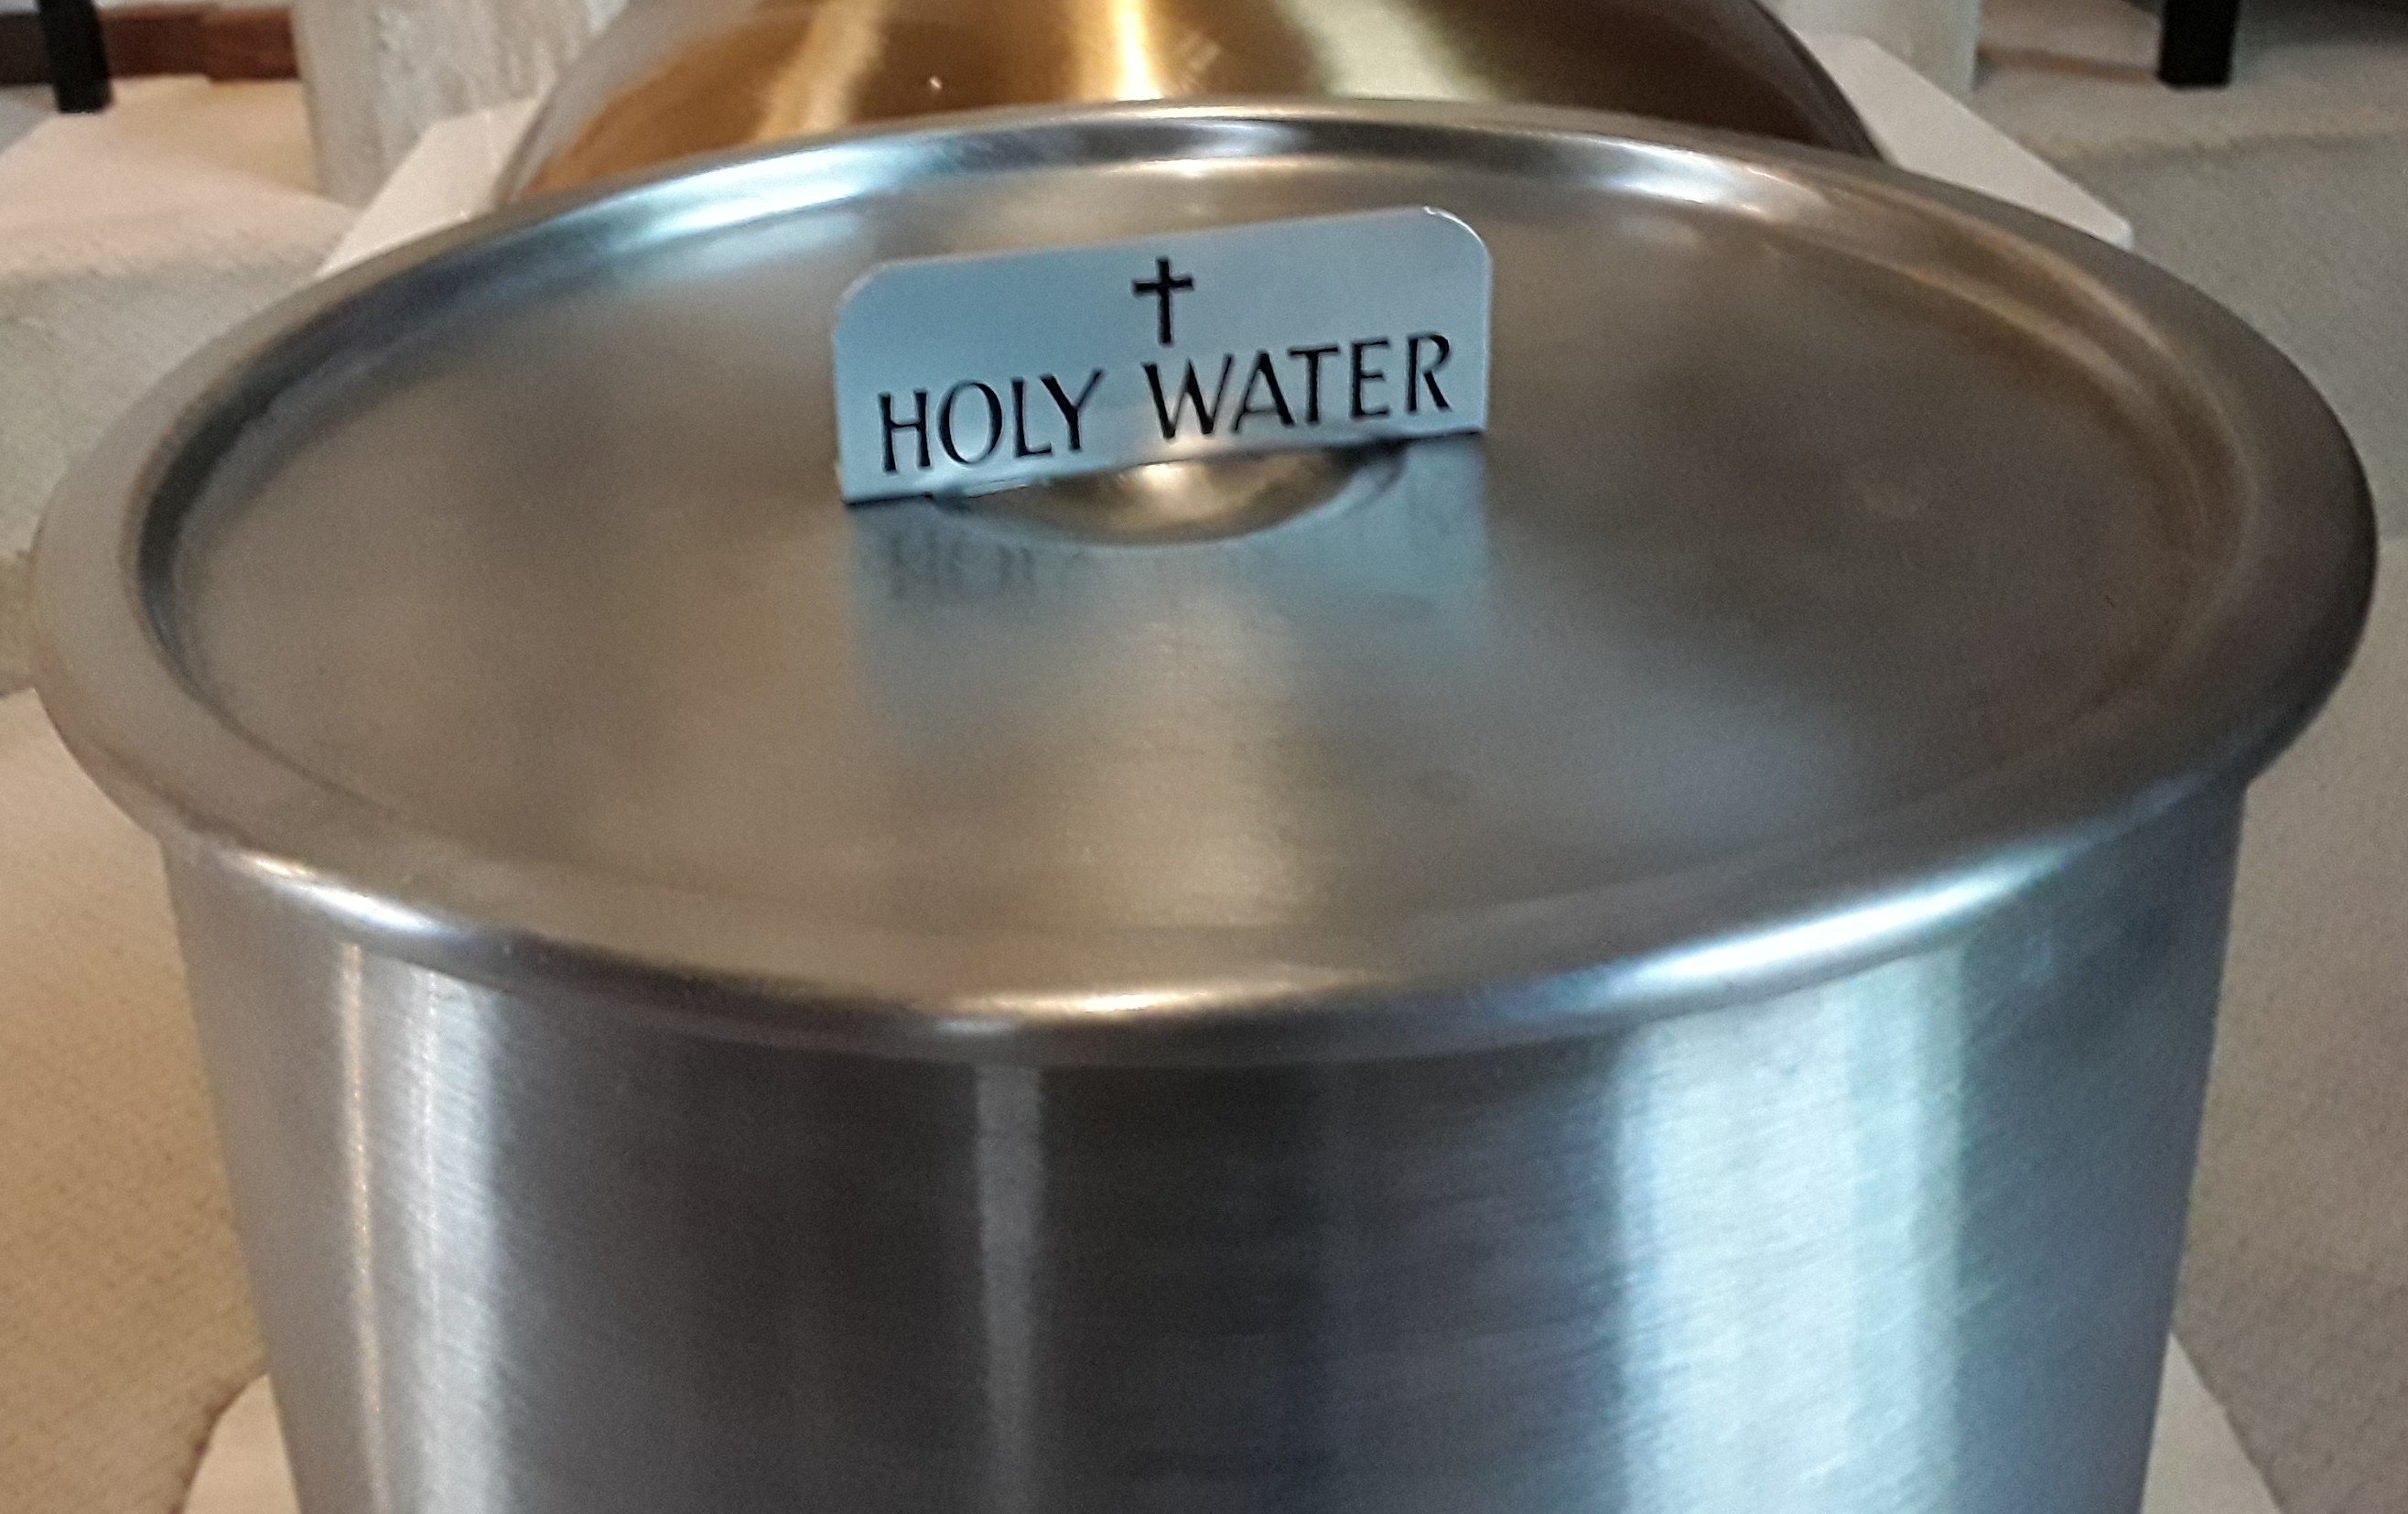 Stainless steel container of holy water